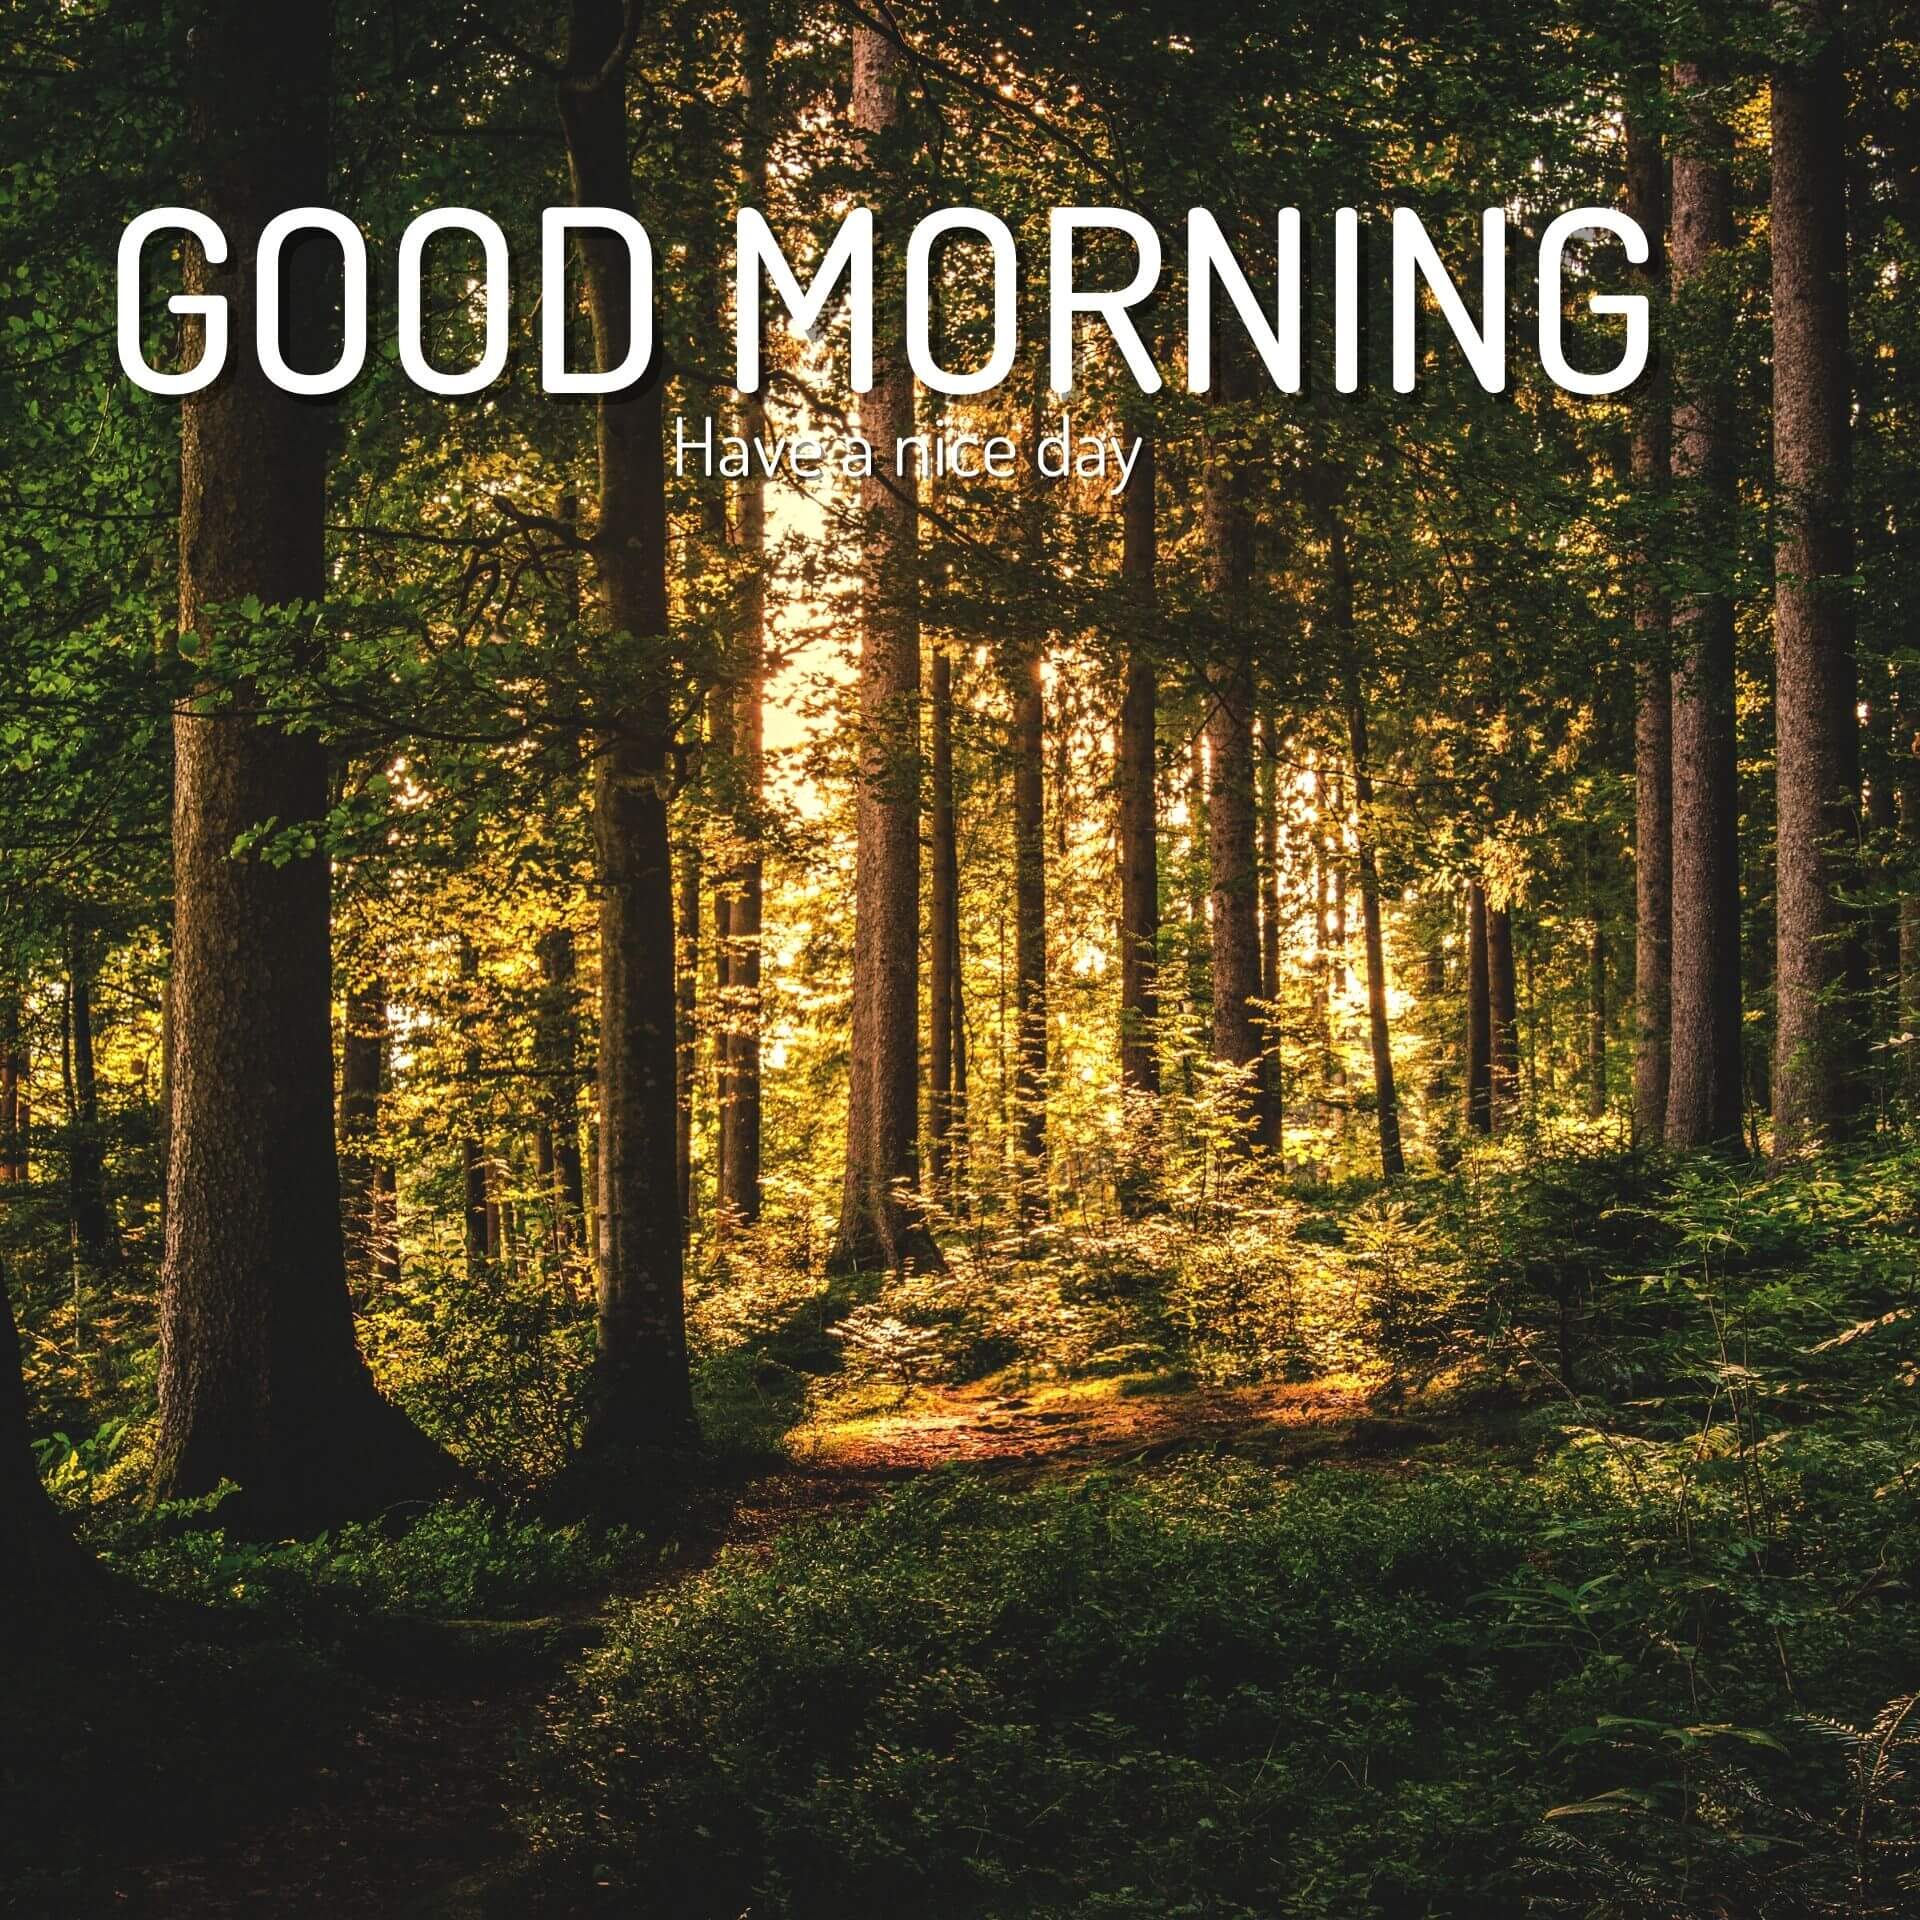 Good Morning Images HD 1080p Download 2023 Free